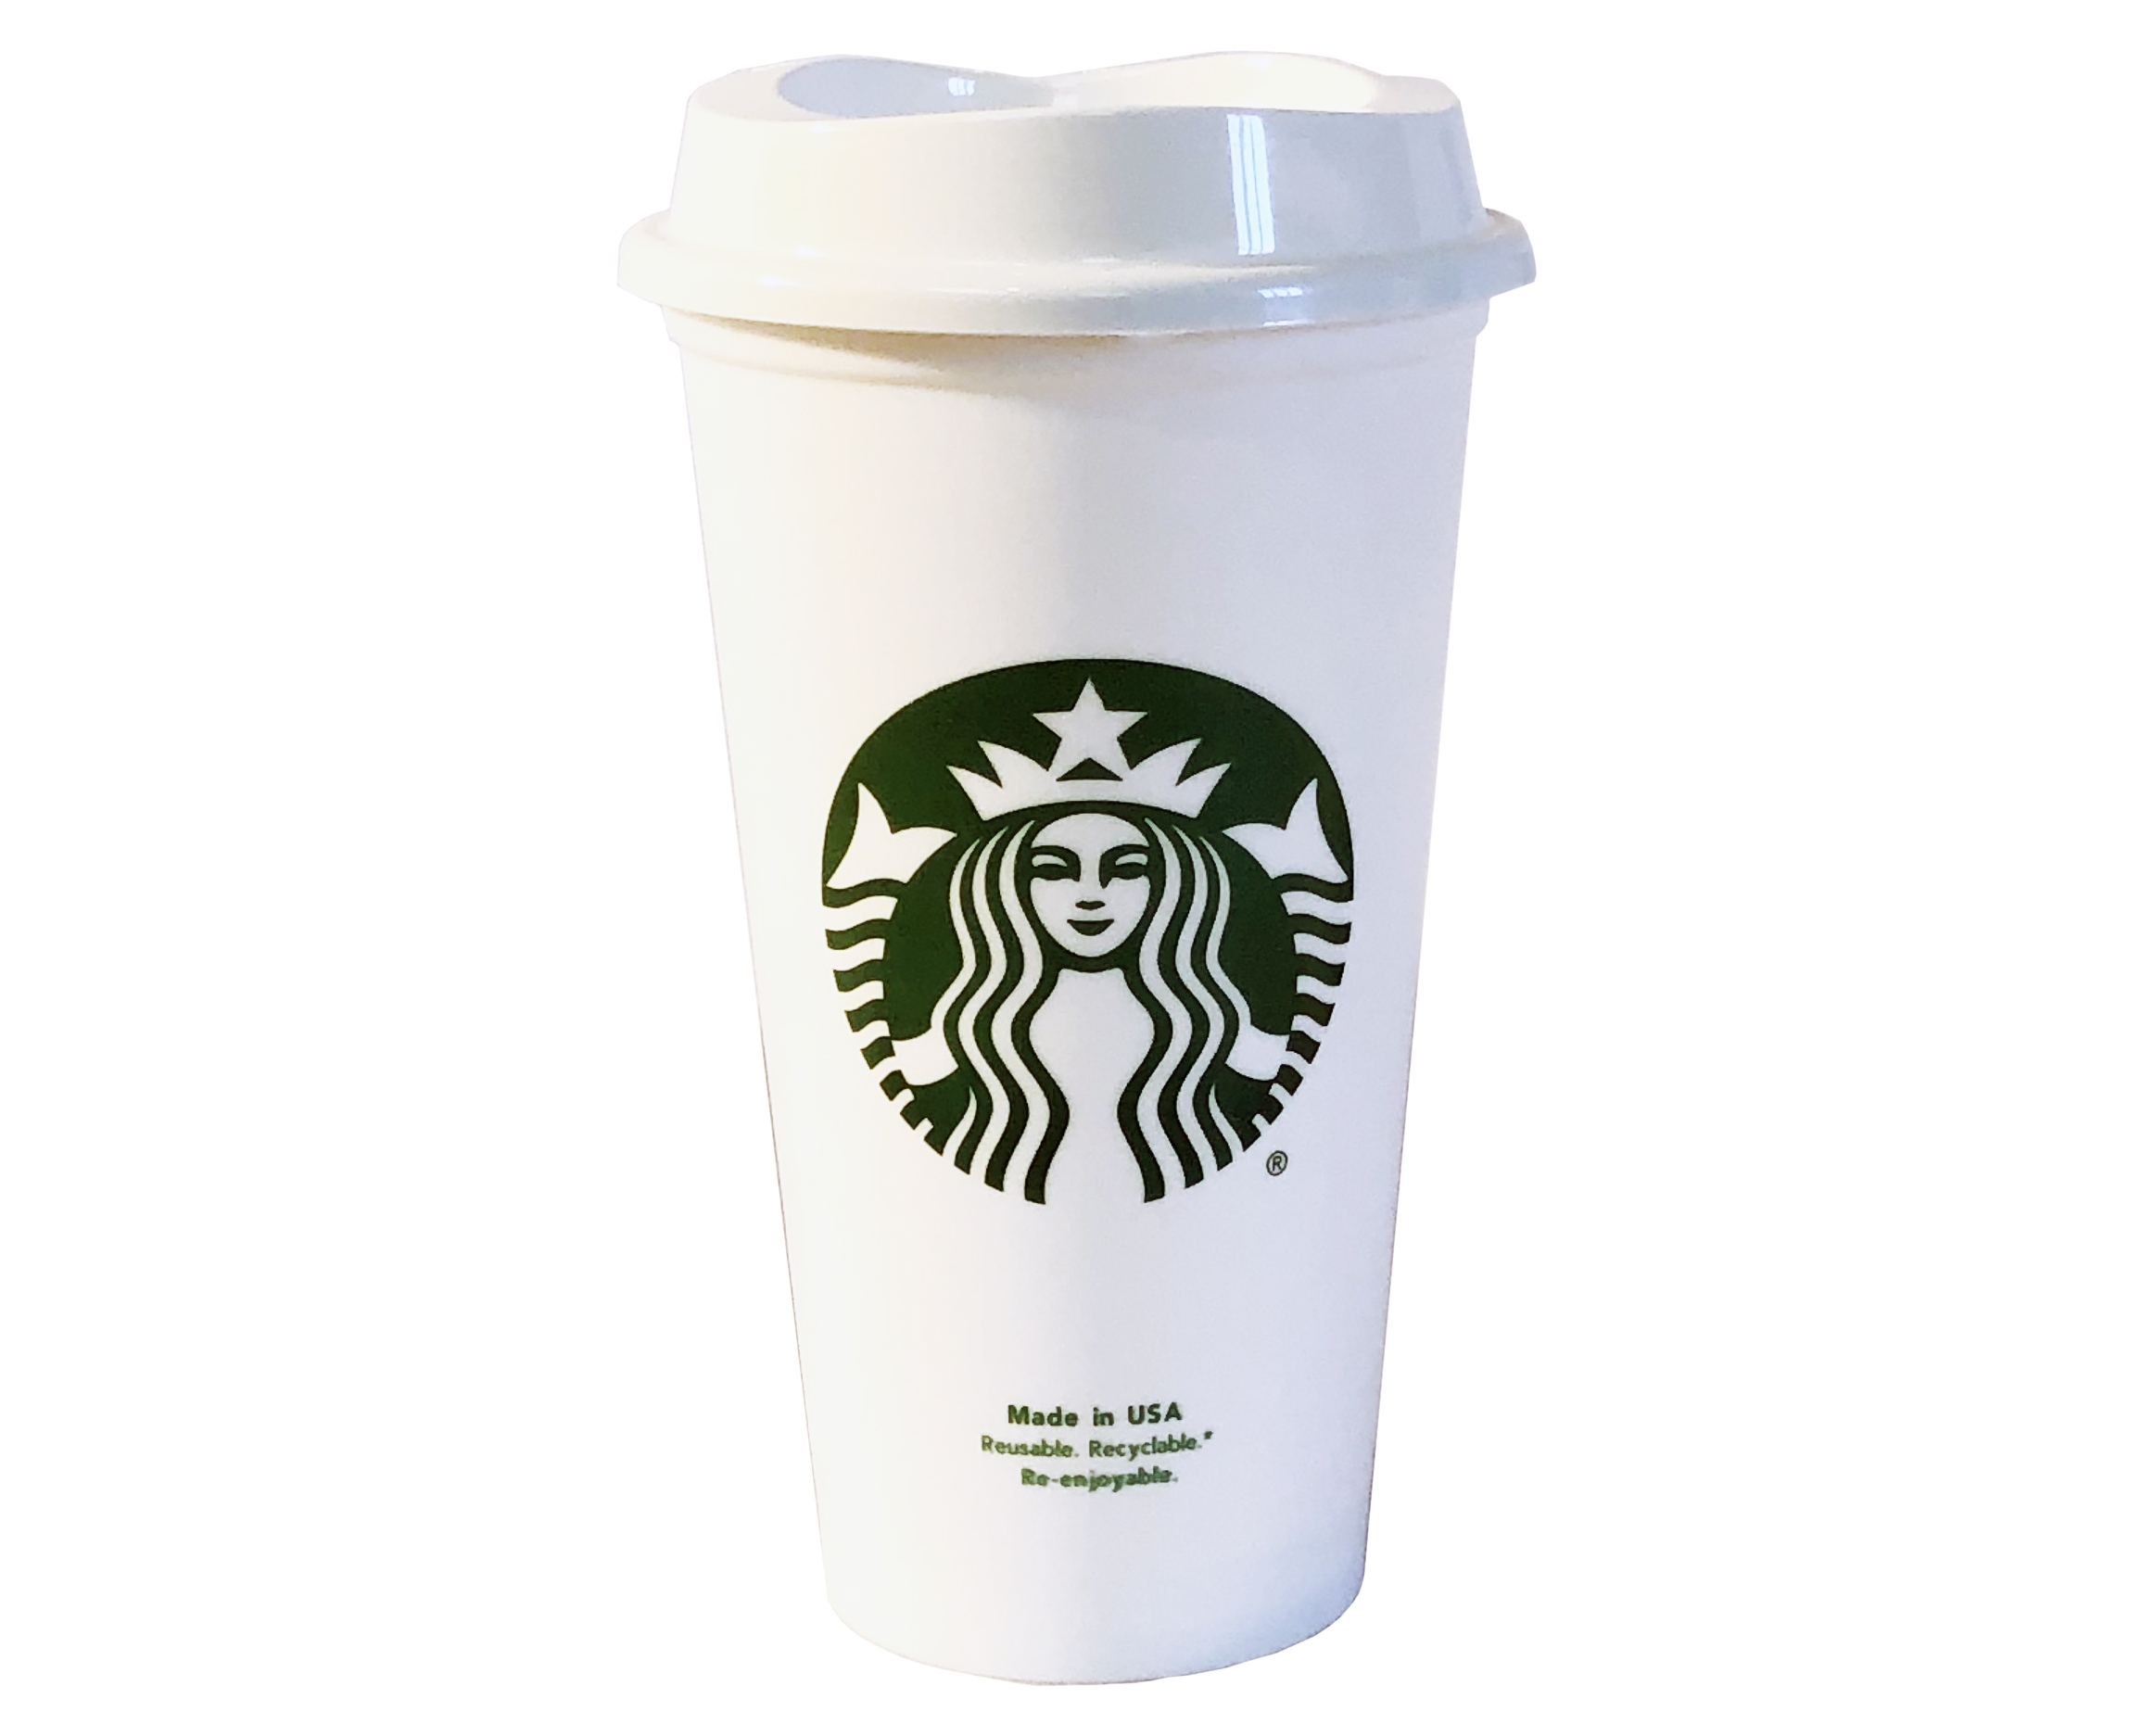 https://www.pointproductsusa.com/images/products/starbucks-reusable-hot-cup.jpg